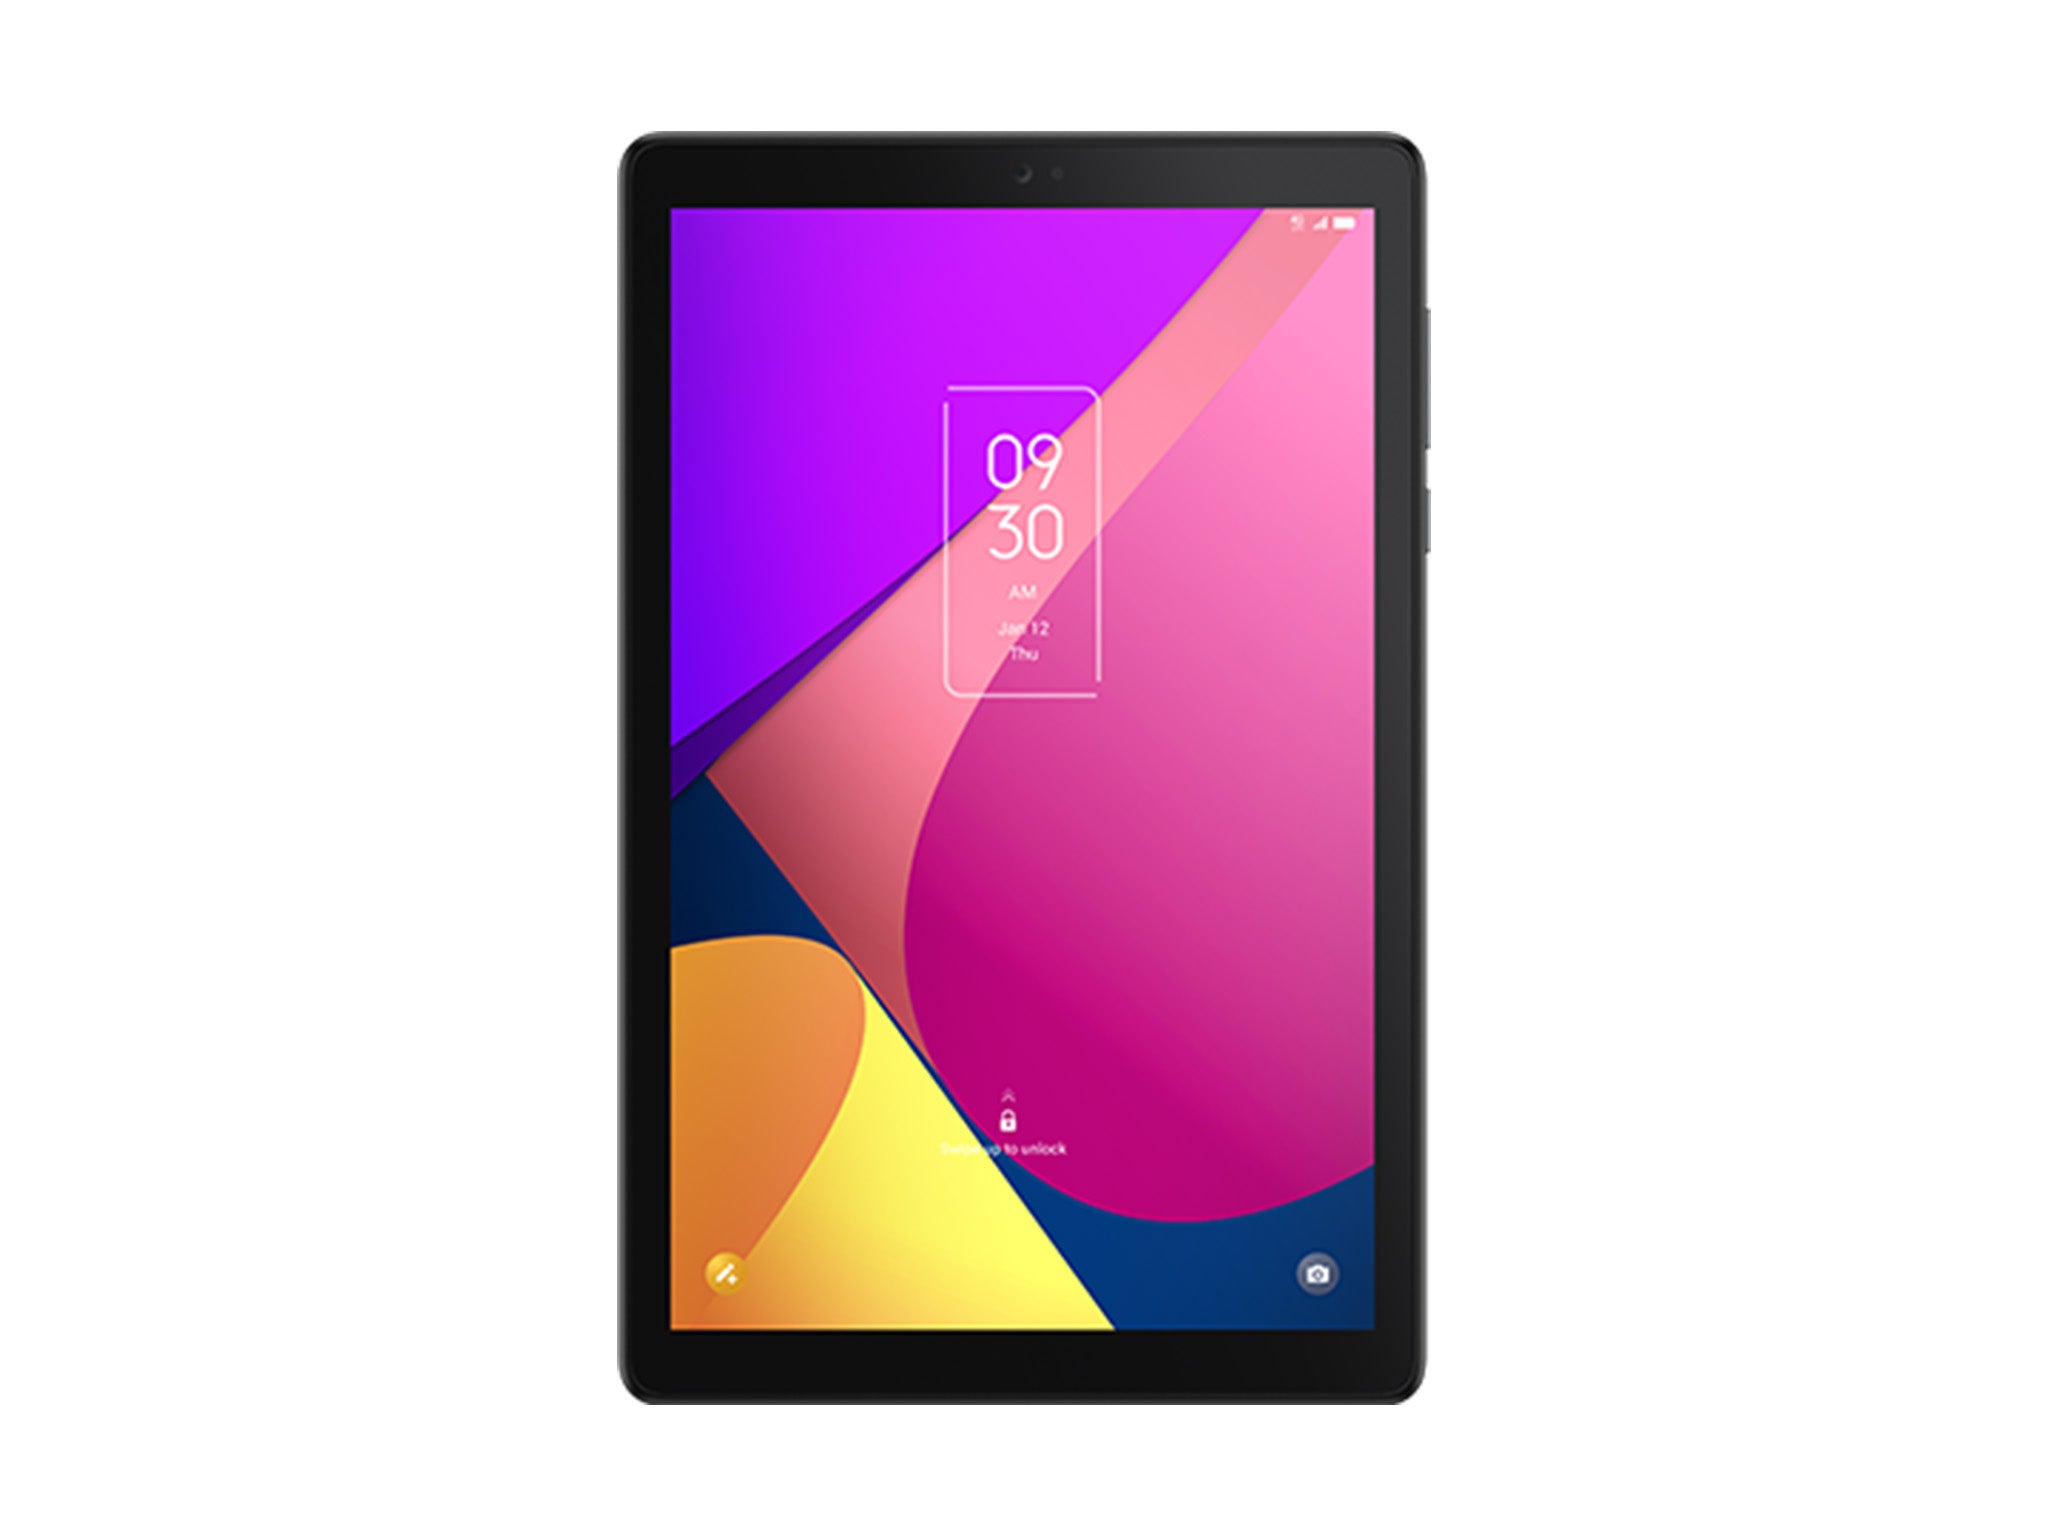 TCL Tablets - Powerful, portable, and beautiful - TCL UK